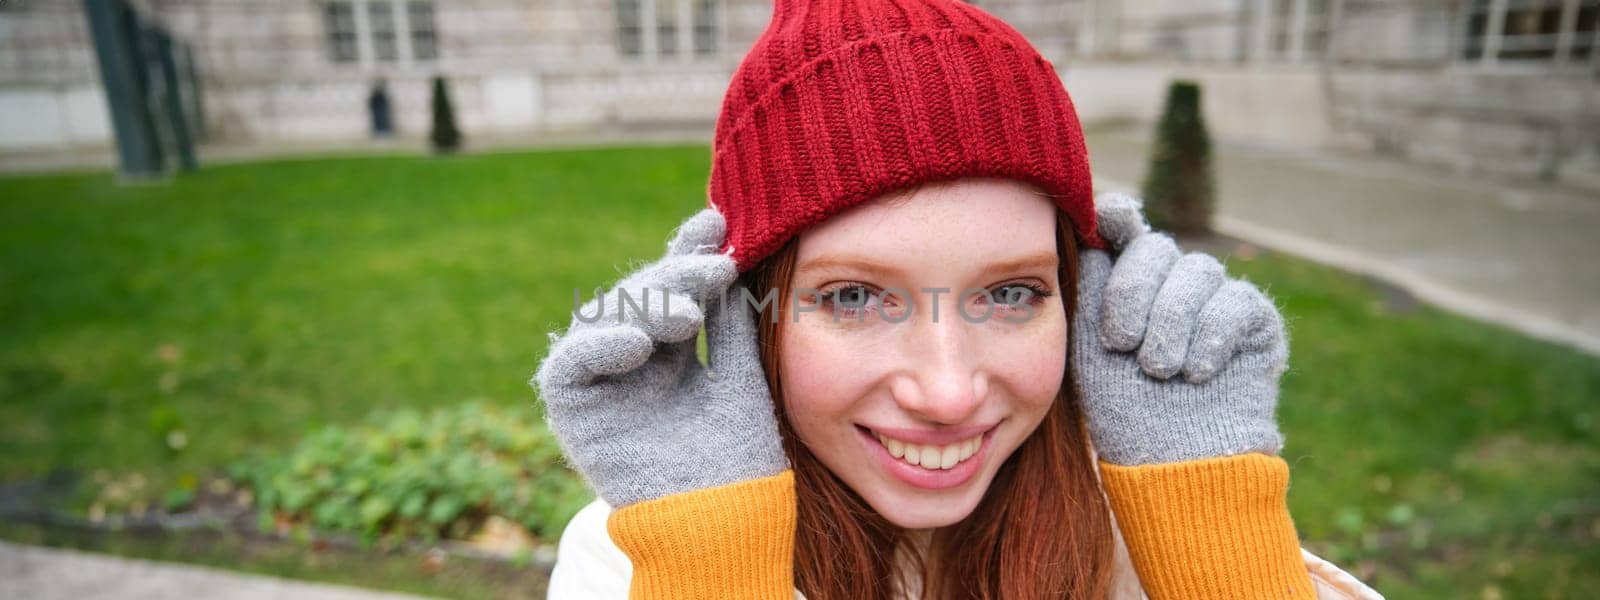 Close up portrait of beautiful redhead woman in red knitted hat, warm gloves, smiling and looking happy at camera, sitting in park.